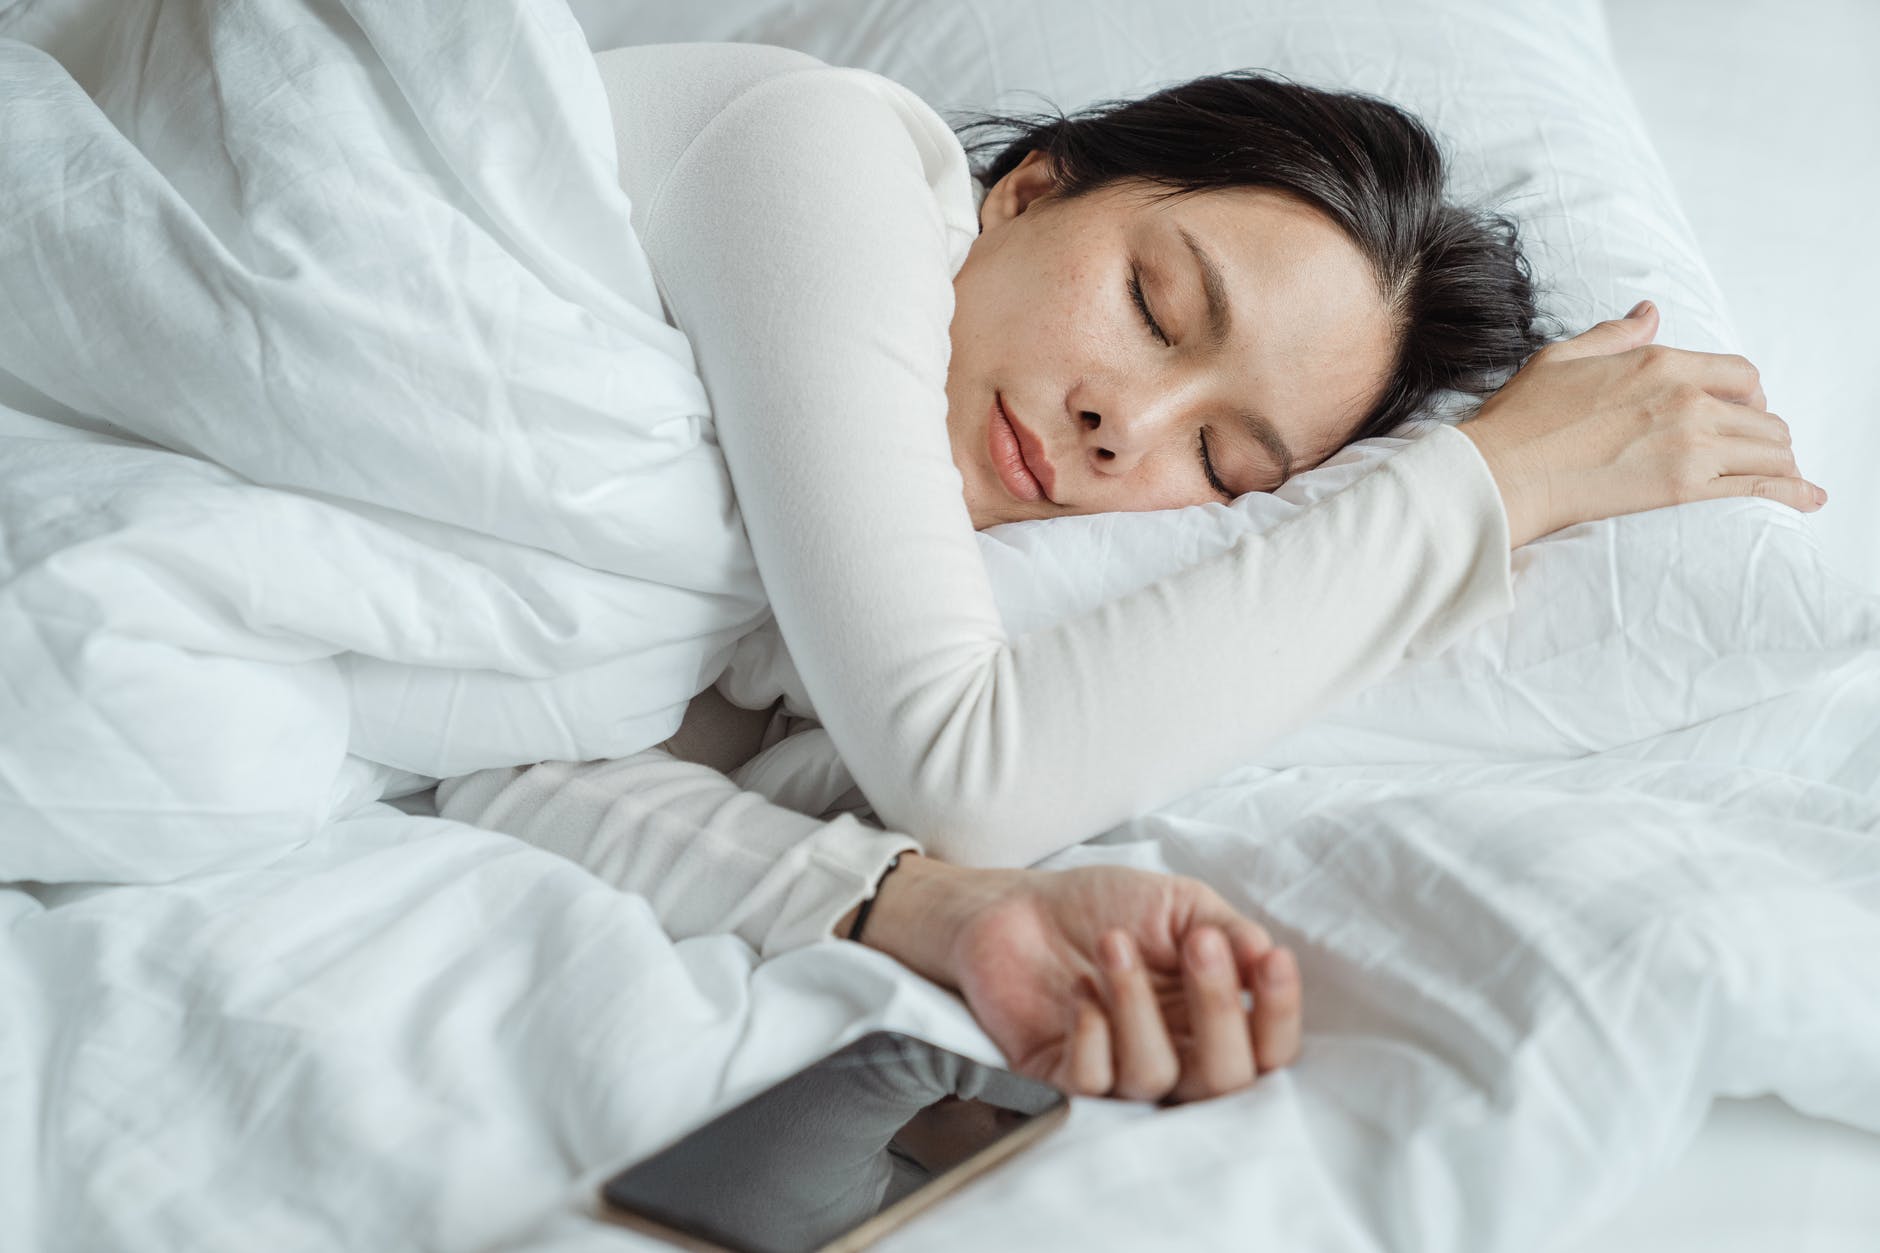 Products That Can Help Your Quality of Sleep,